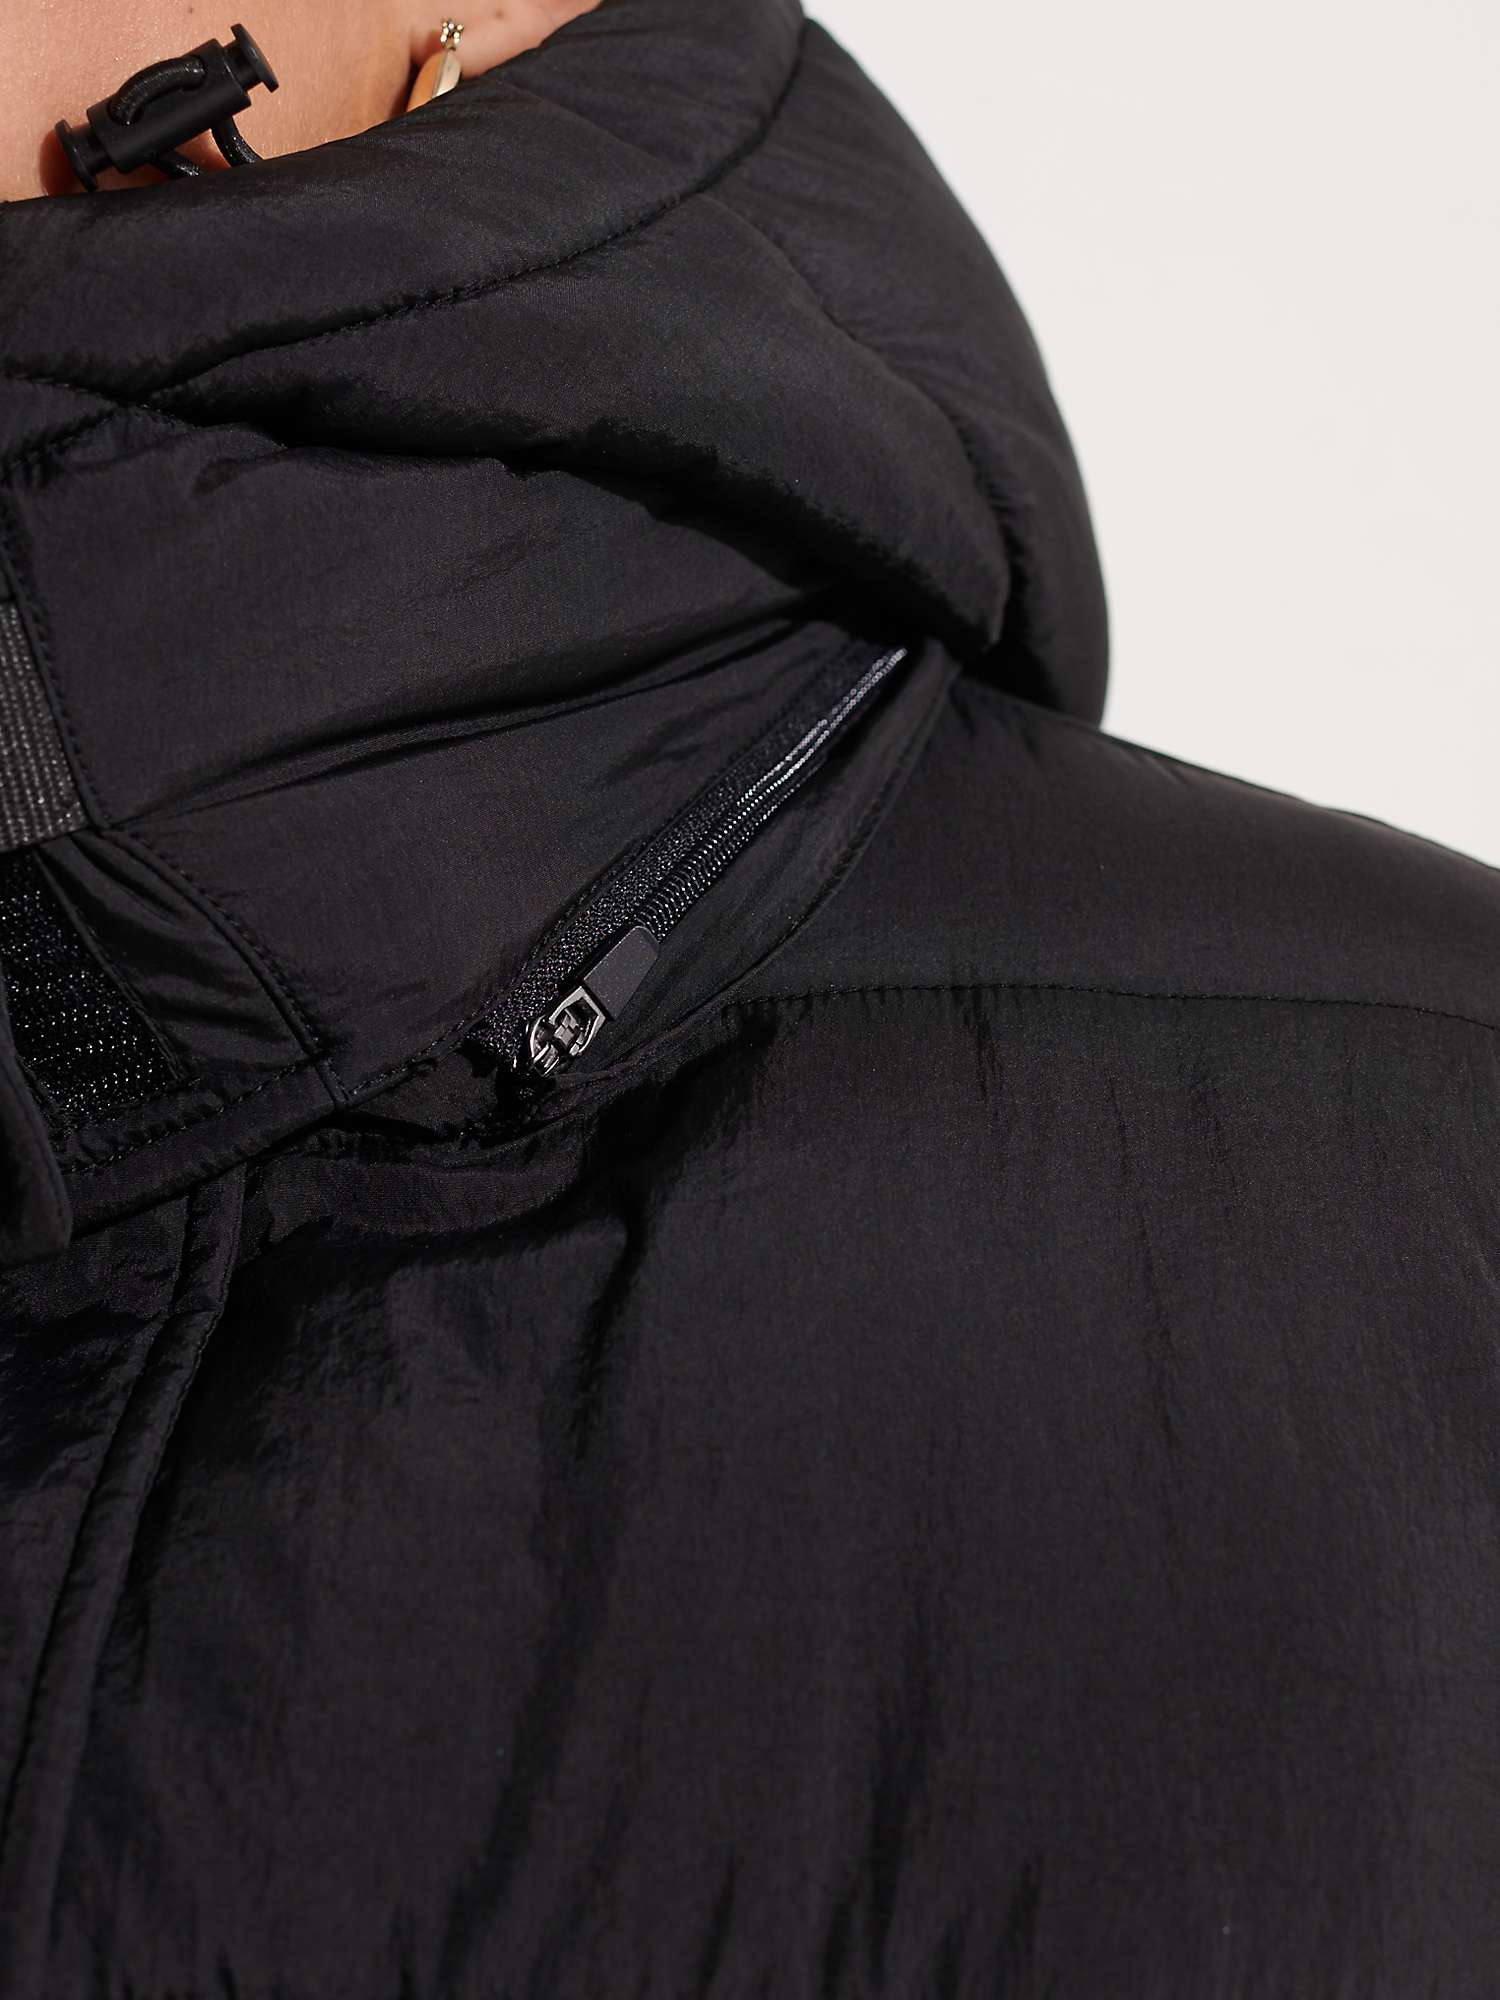 Superdry Expedition Cocoon Padded Coat, Black at John Lewis & Partners